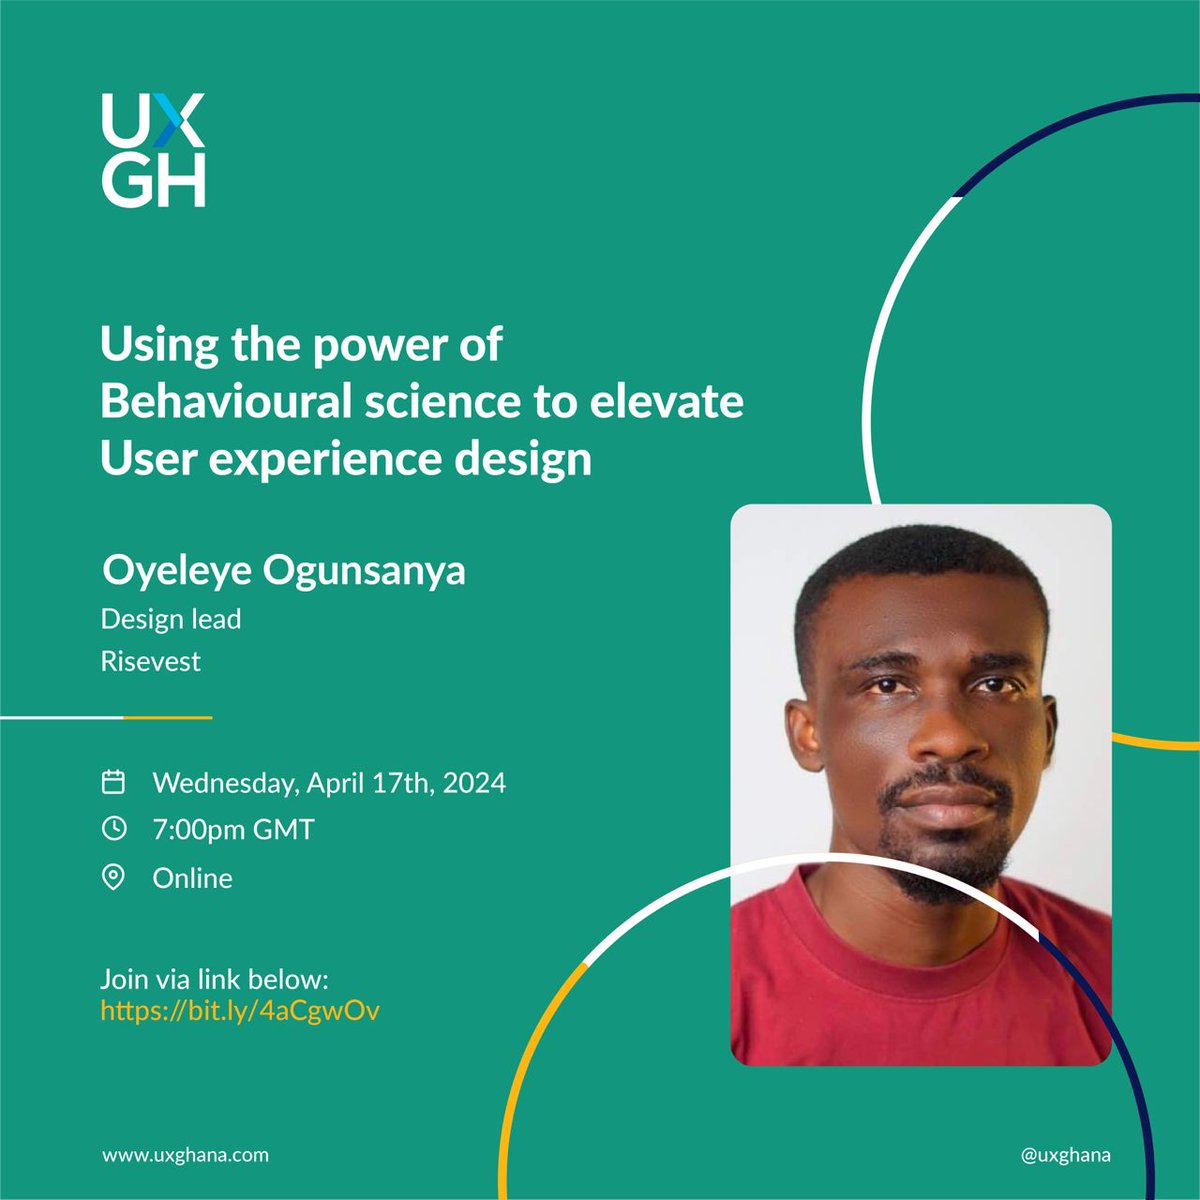 Mark on your calendar and Join our webinar via: bit.ly/4aCgwOv on using the power of behavioral science in UX design with @leyeconnect and discover how to create an interface that converts visitors into customers? #UXDesign #behavioraldesign #webinar #uxghana